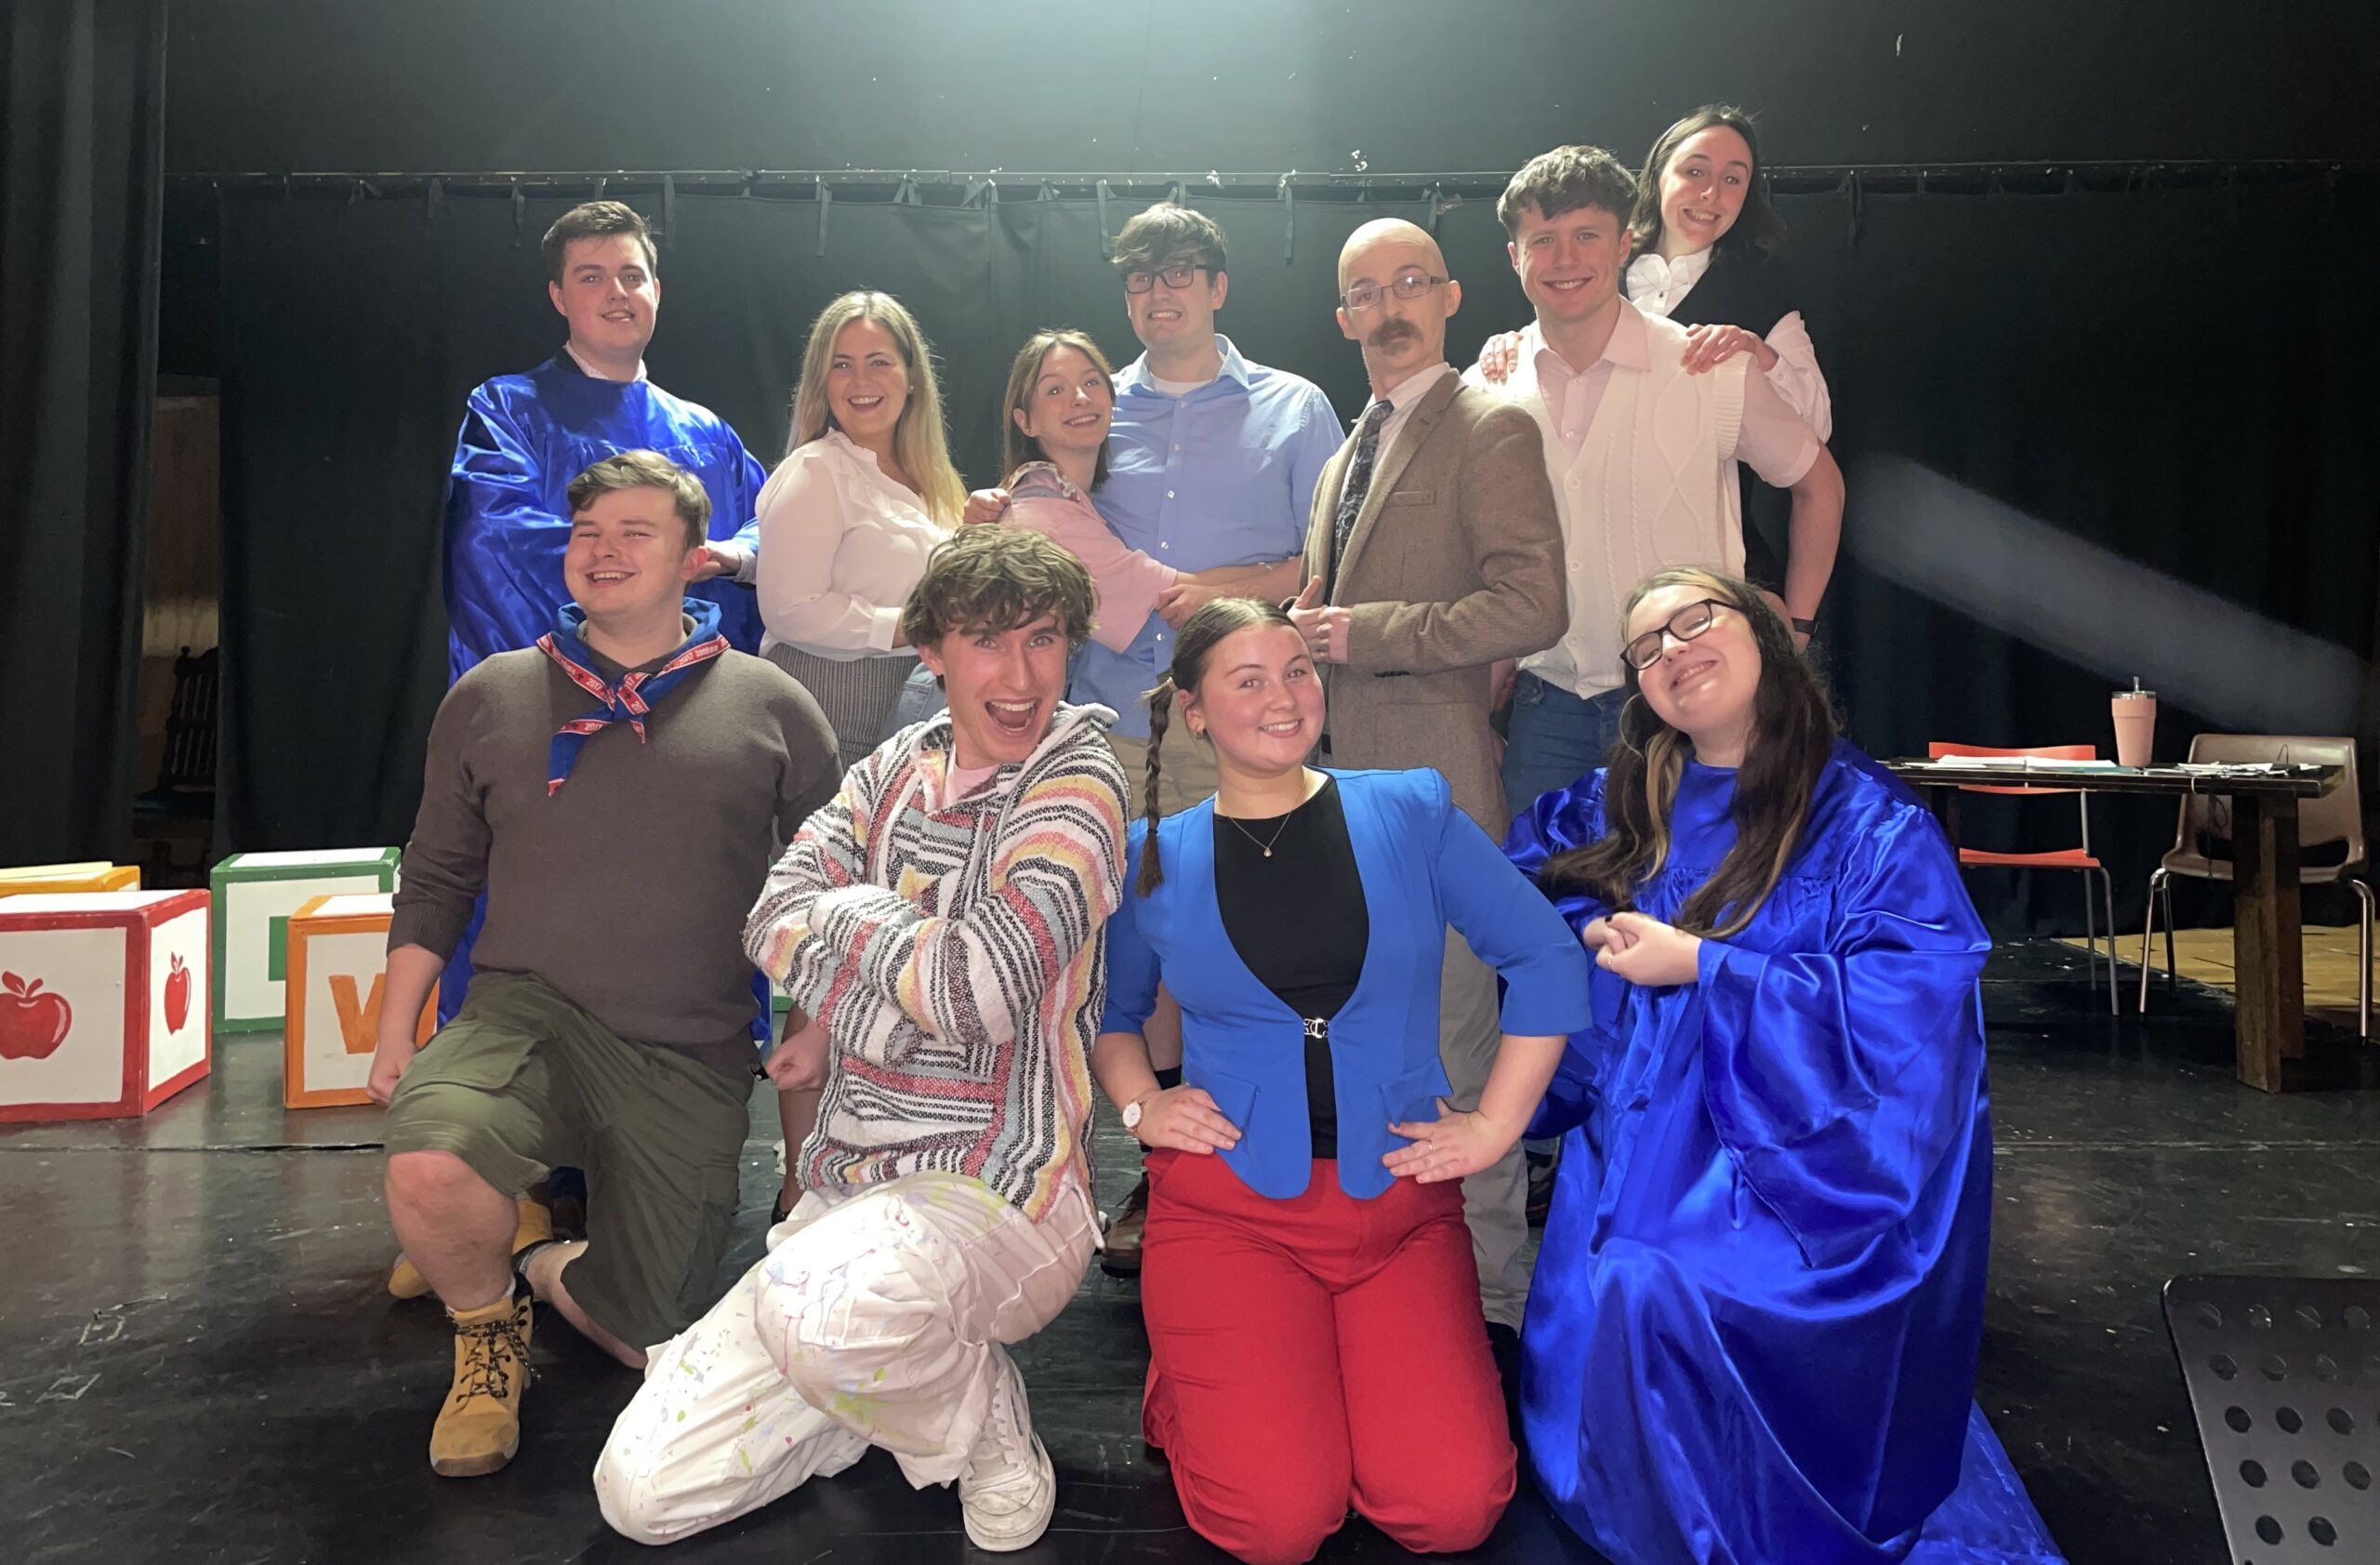 UL Musical Theatre Society bring ‘The 25th Annual Putnam County Spelling Bee' to Belltable April 3-5